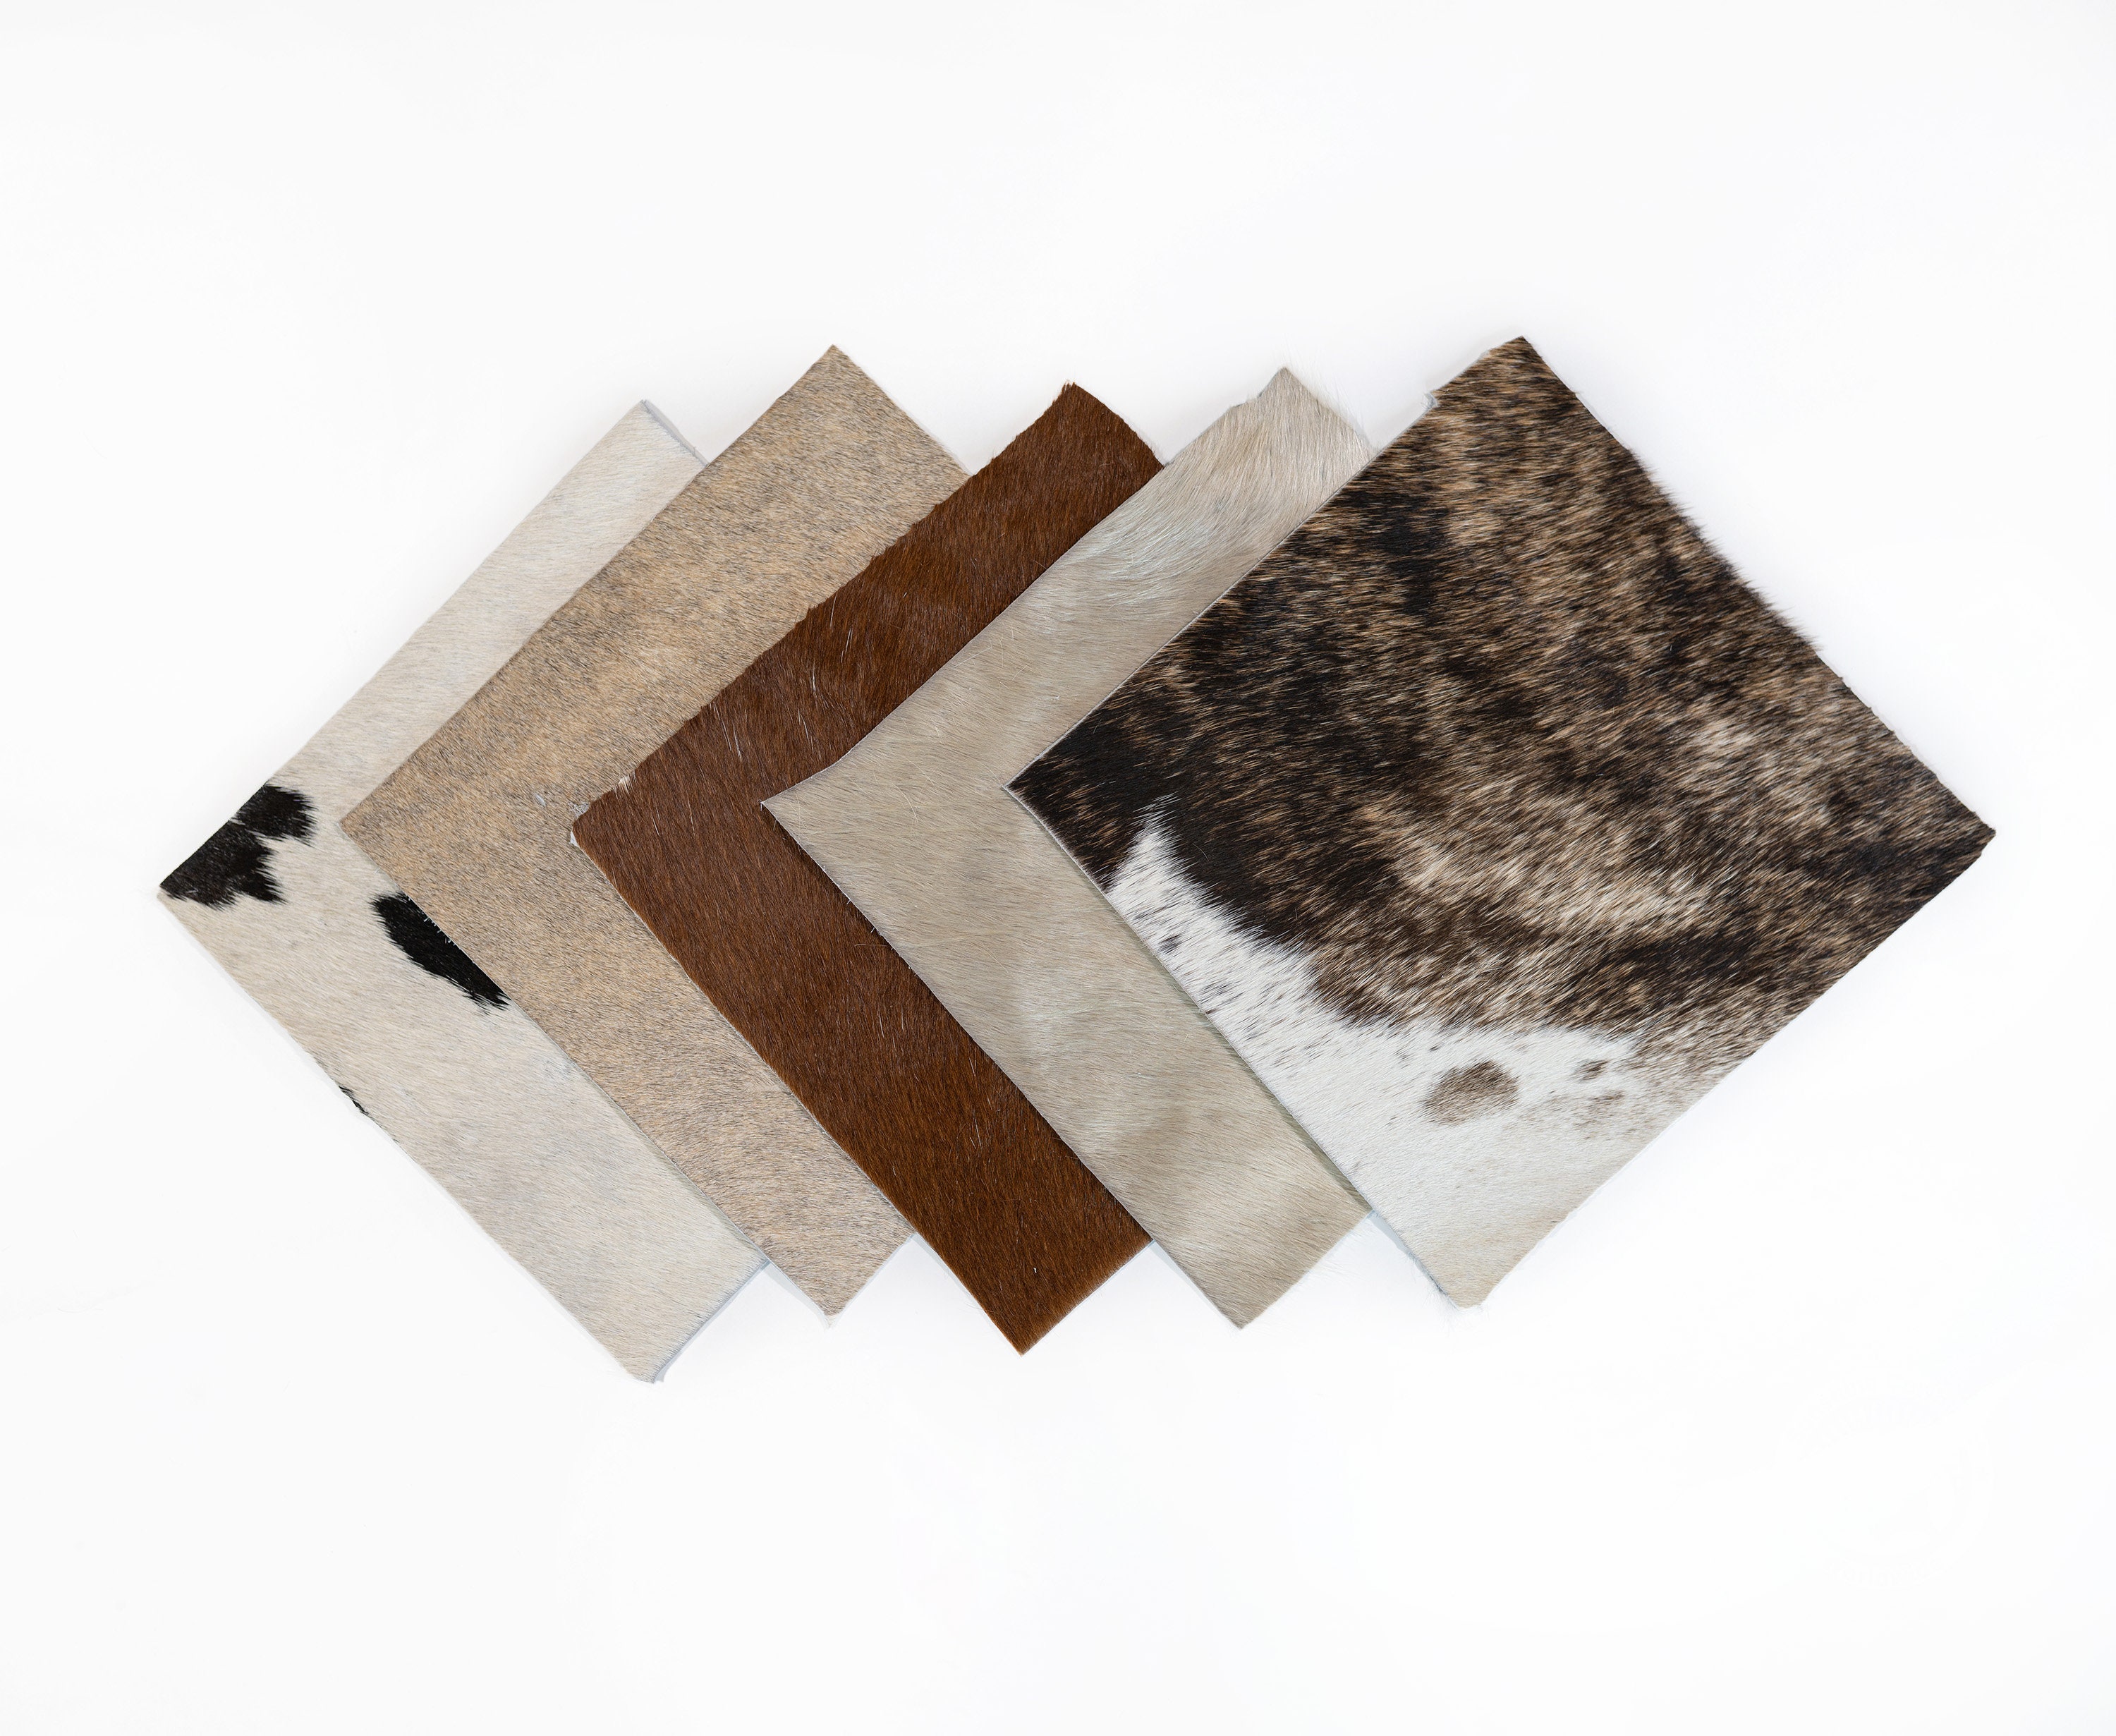 Souluxry Real Cowhide Pieces,Cowhide Scraps,Cowhide Scrap Pieces,15 Pieces Hair-On Cowhide Leather Scraps in Mixed Colors and Sizes - Approx. 8 x 8